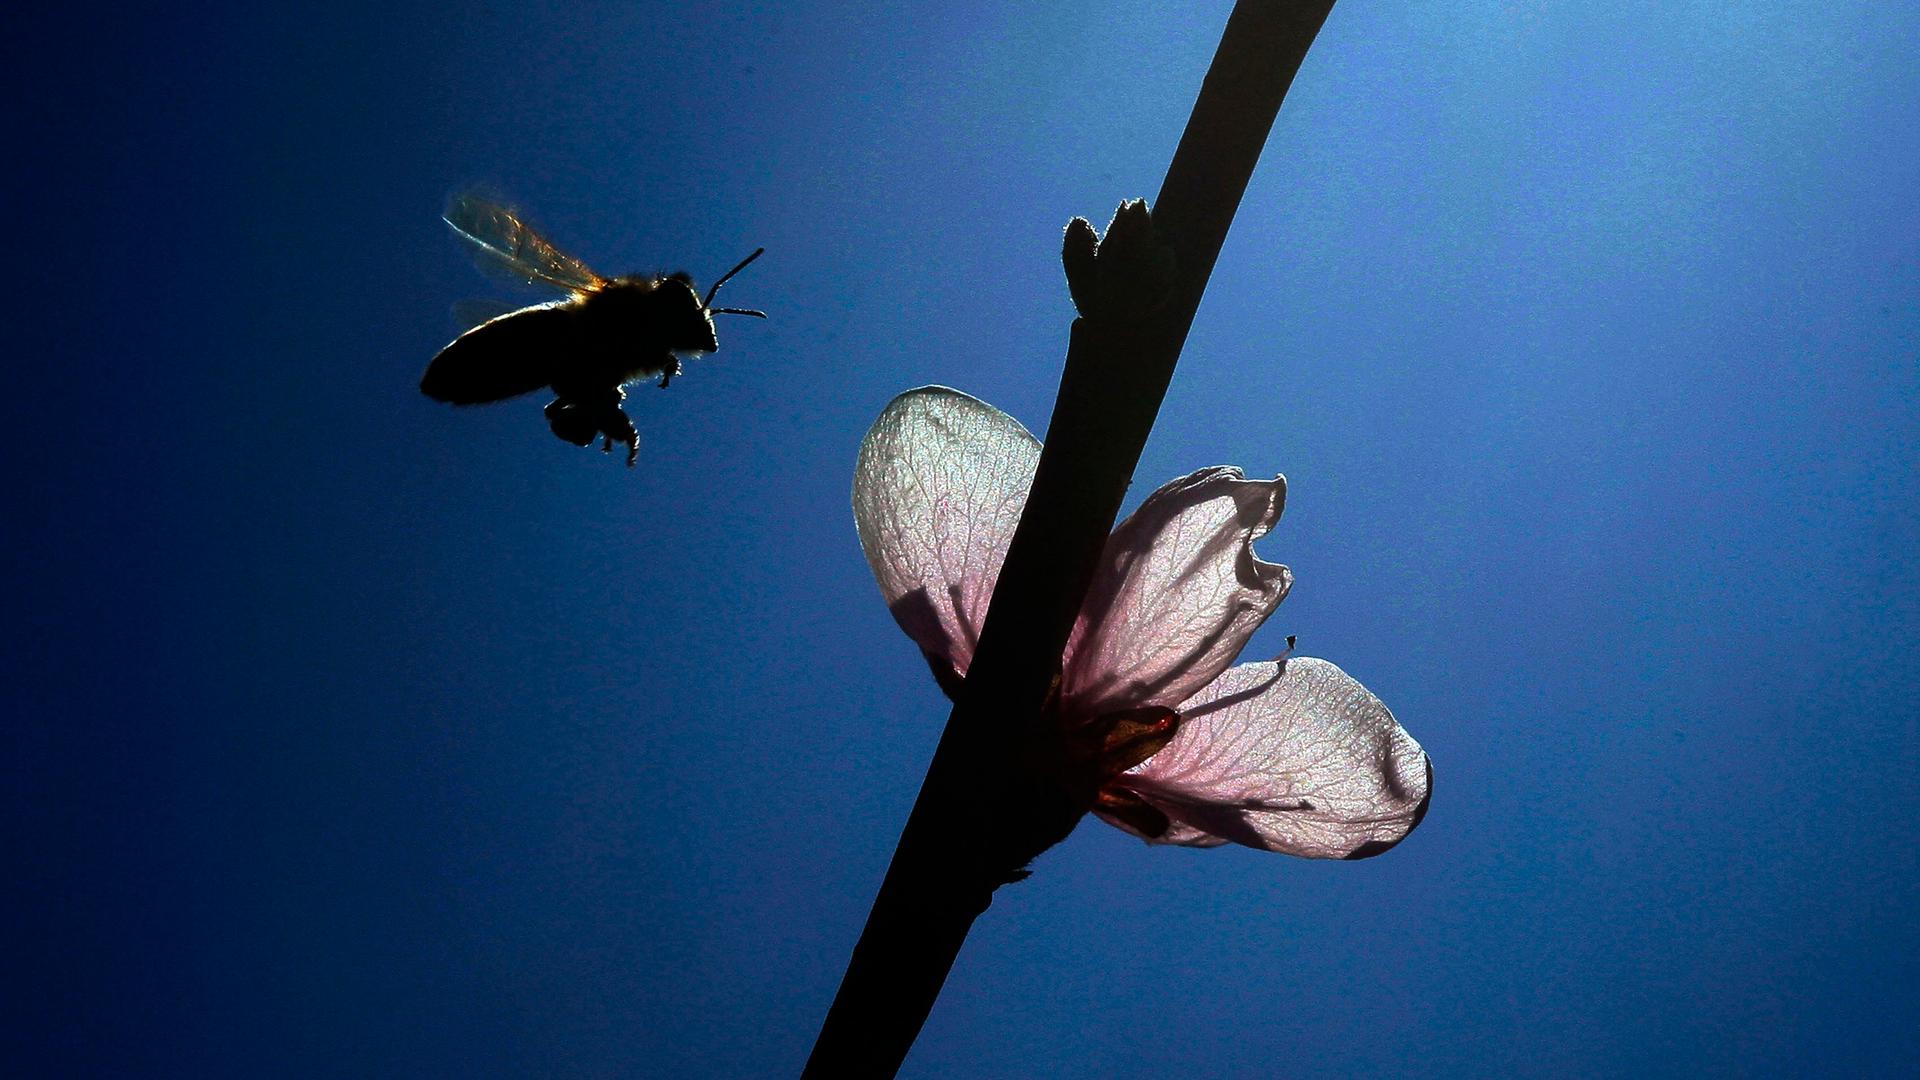 A bee approaches a peach blossom. Many of the more than 20,000 species of bee worldwide, including the well-known honey bee, are threatened by disease, habitat loss, and pesticides. President Obama's national pollinator plan would provide incentives for r